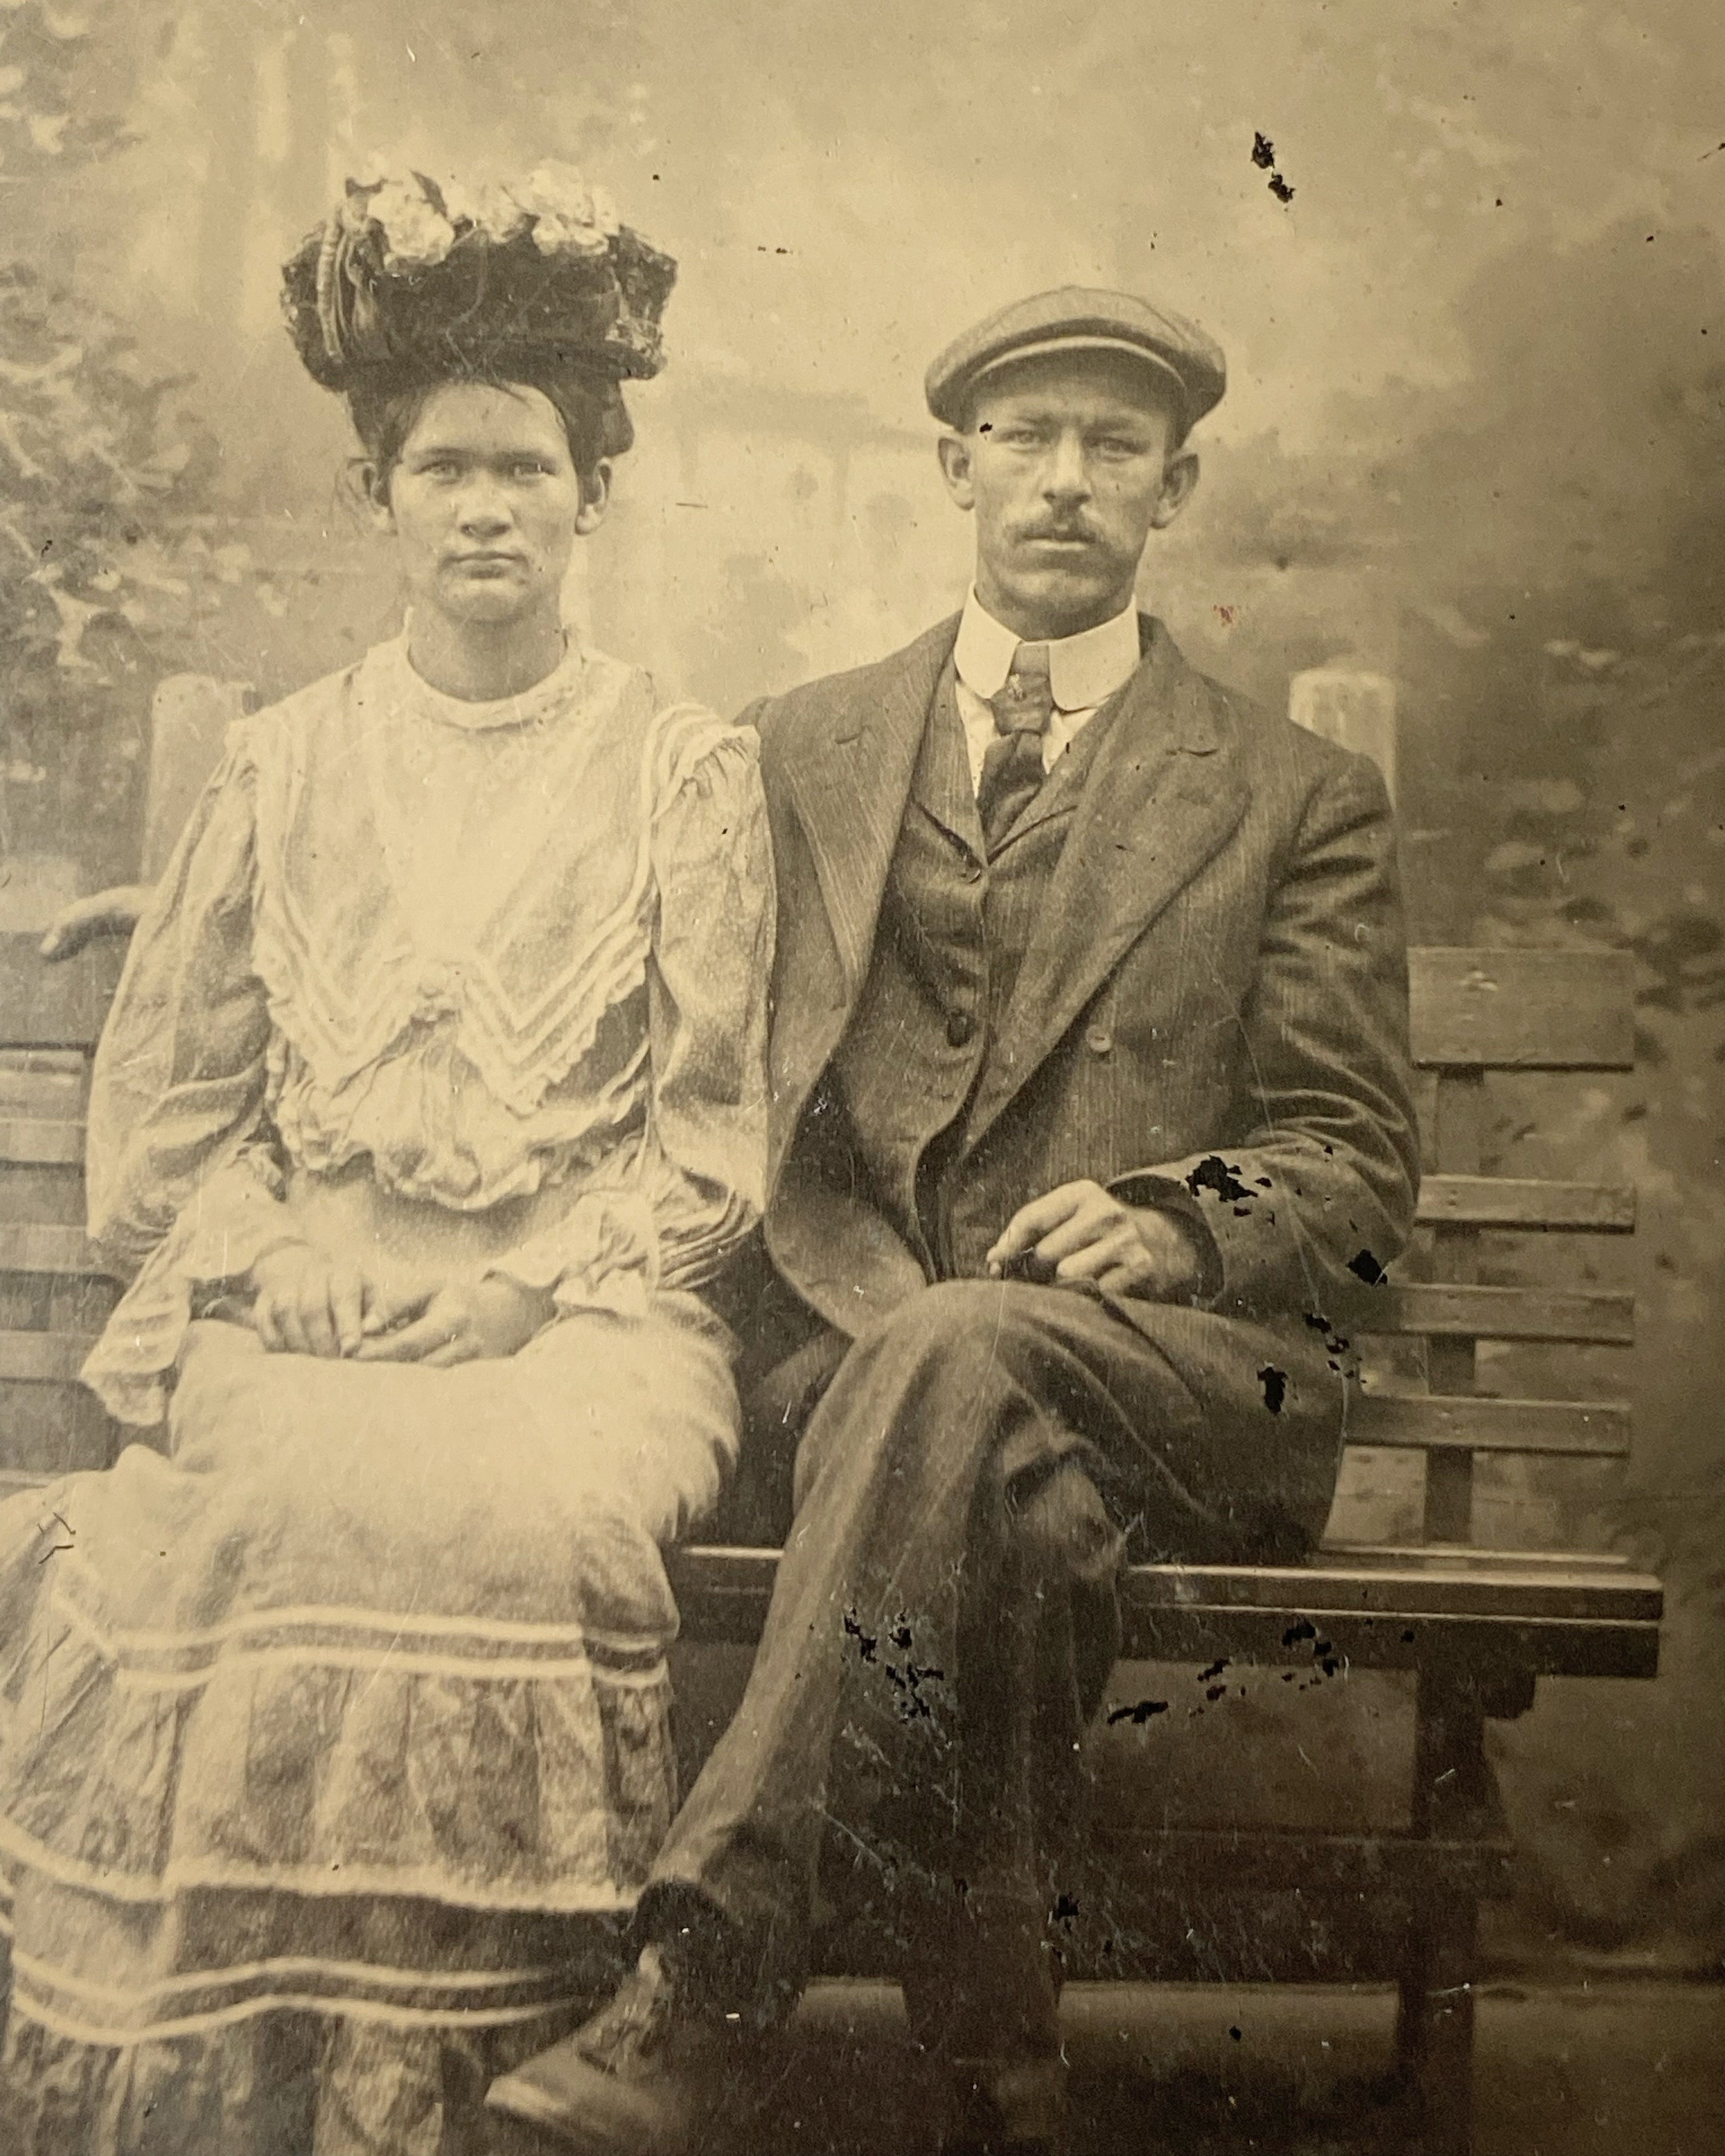 Couple Sitting on Bench with Unusual Hat on Woman Tintype